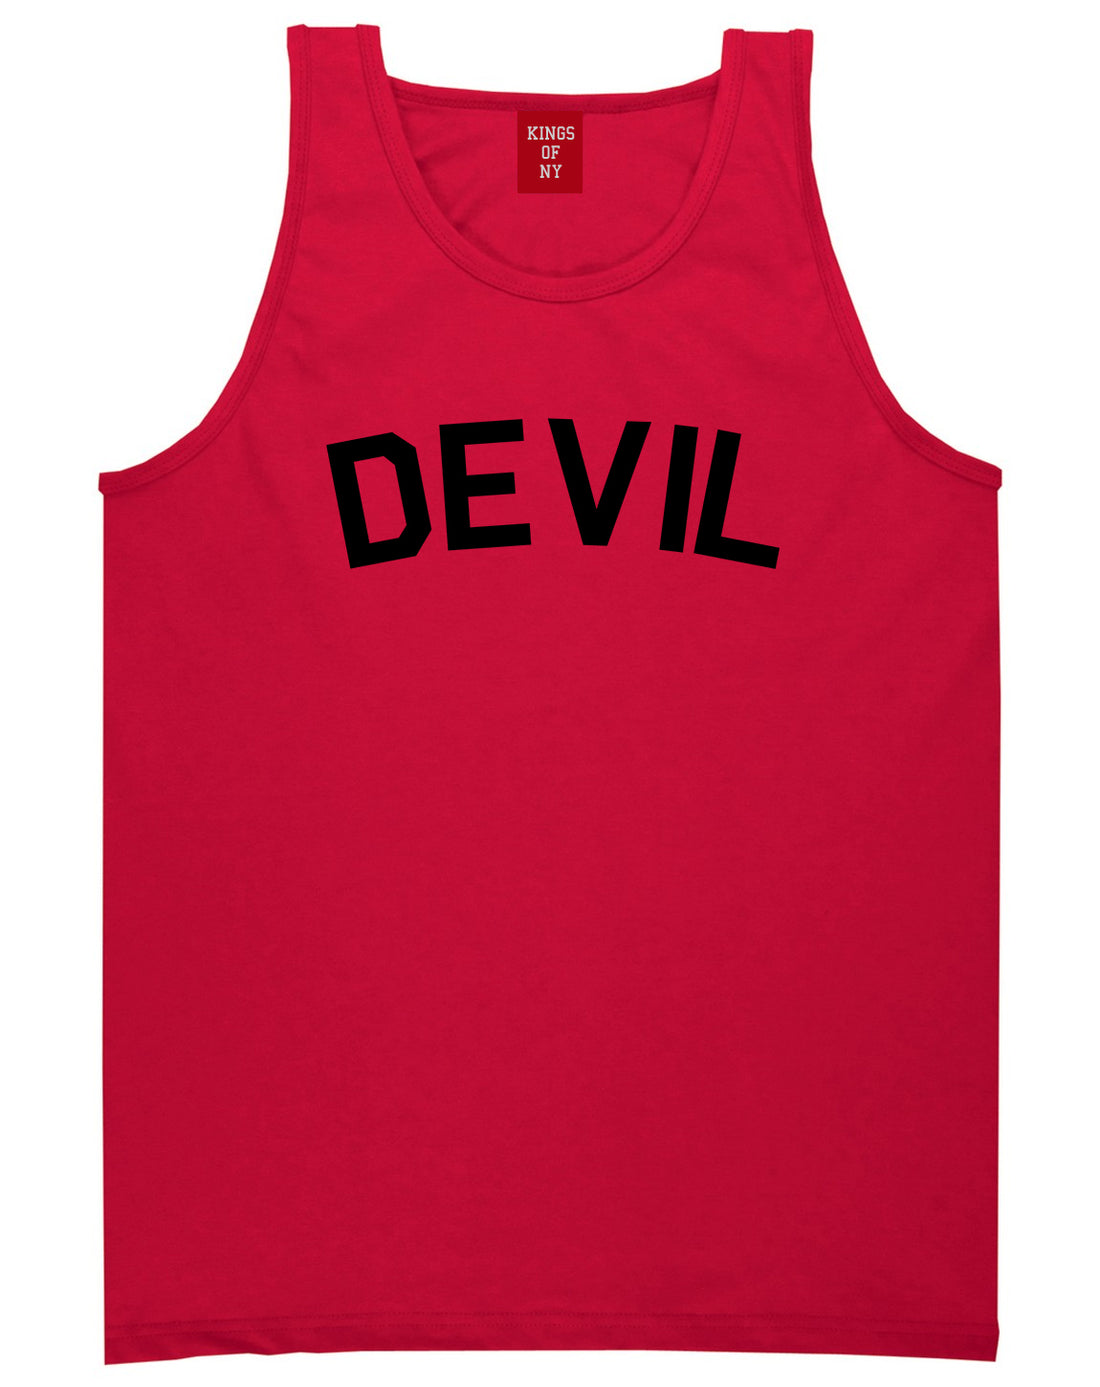 Devil Arch Goth Tank Top Shirt in Red